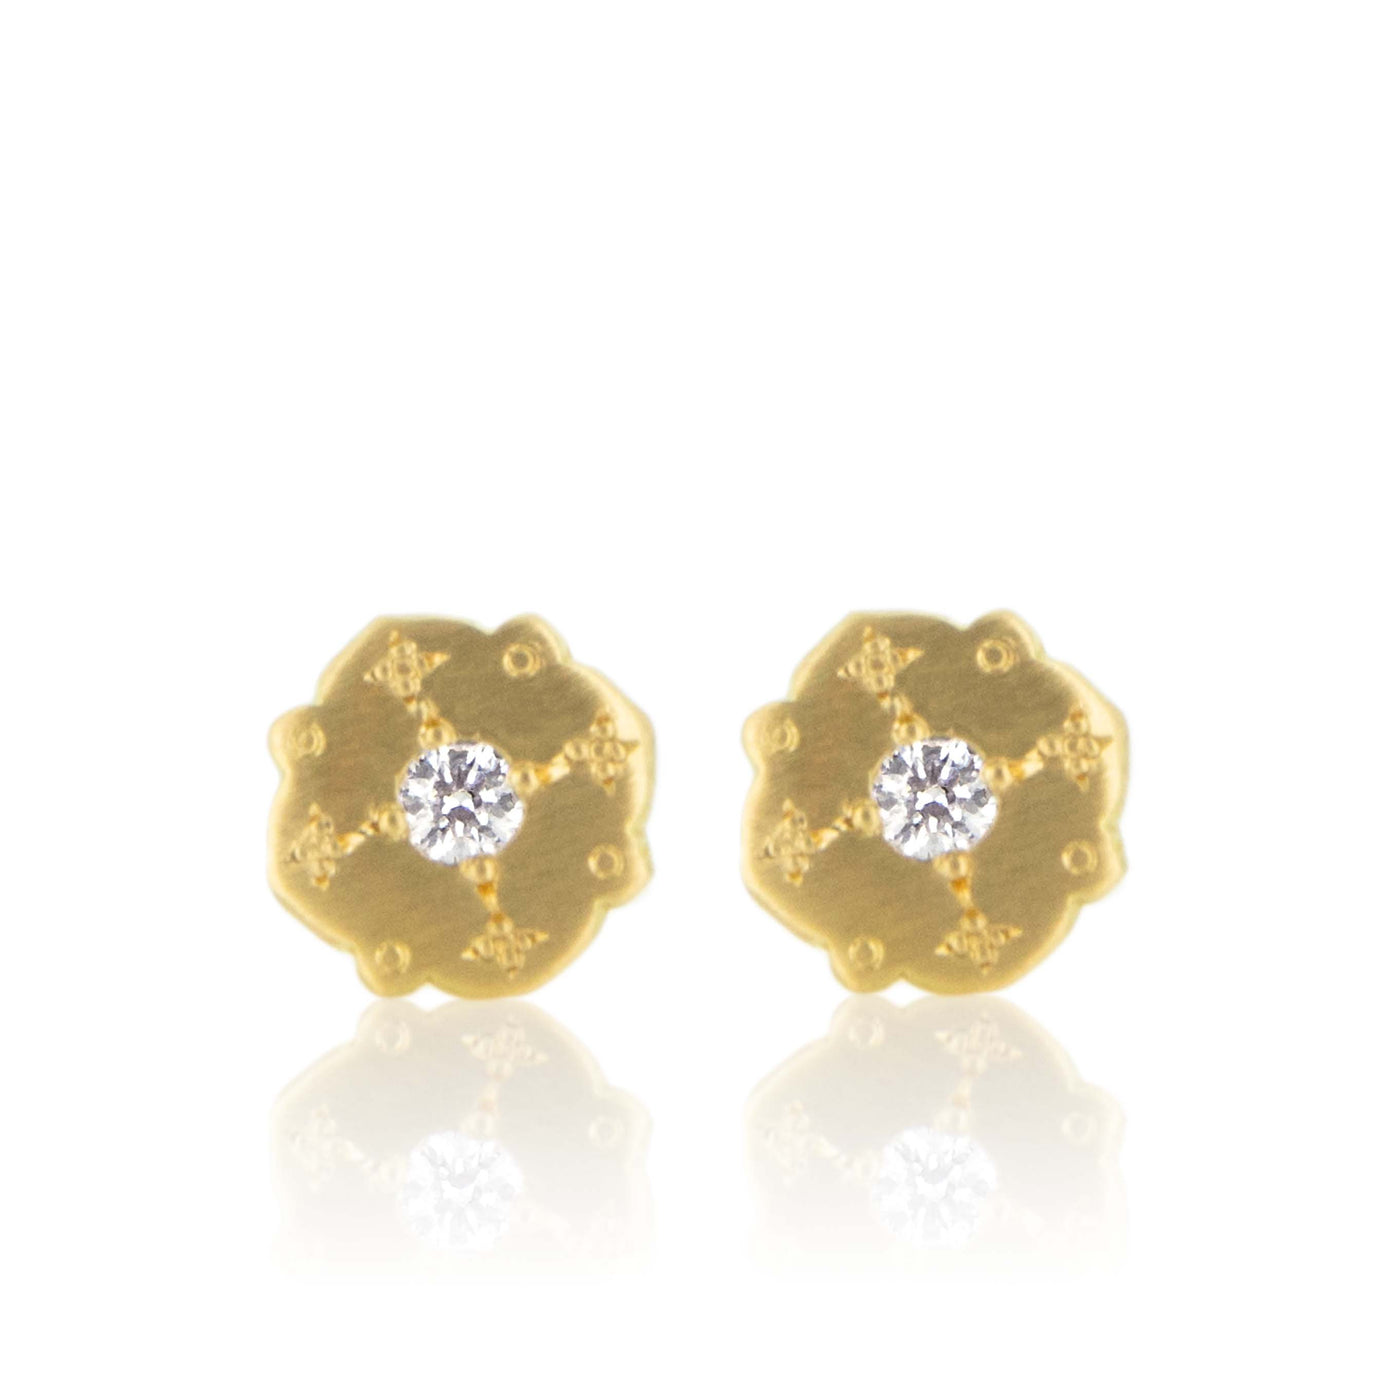 Drops of Happiness Kite Studs